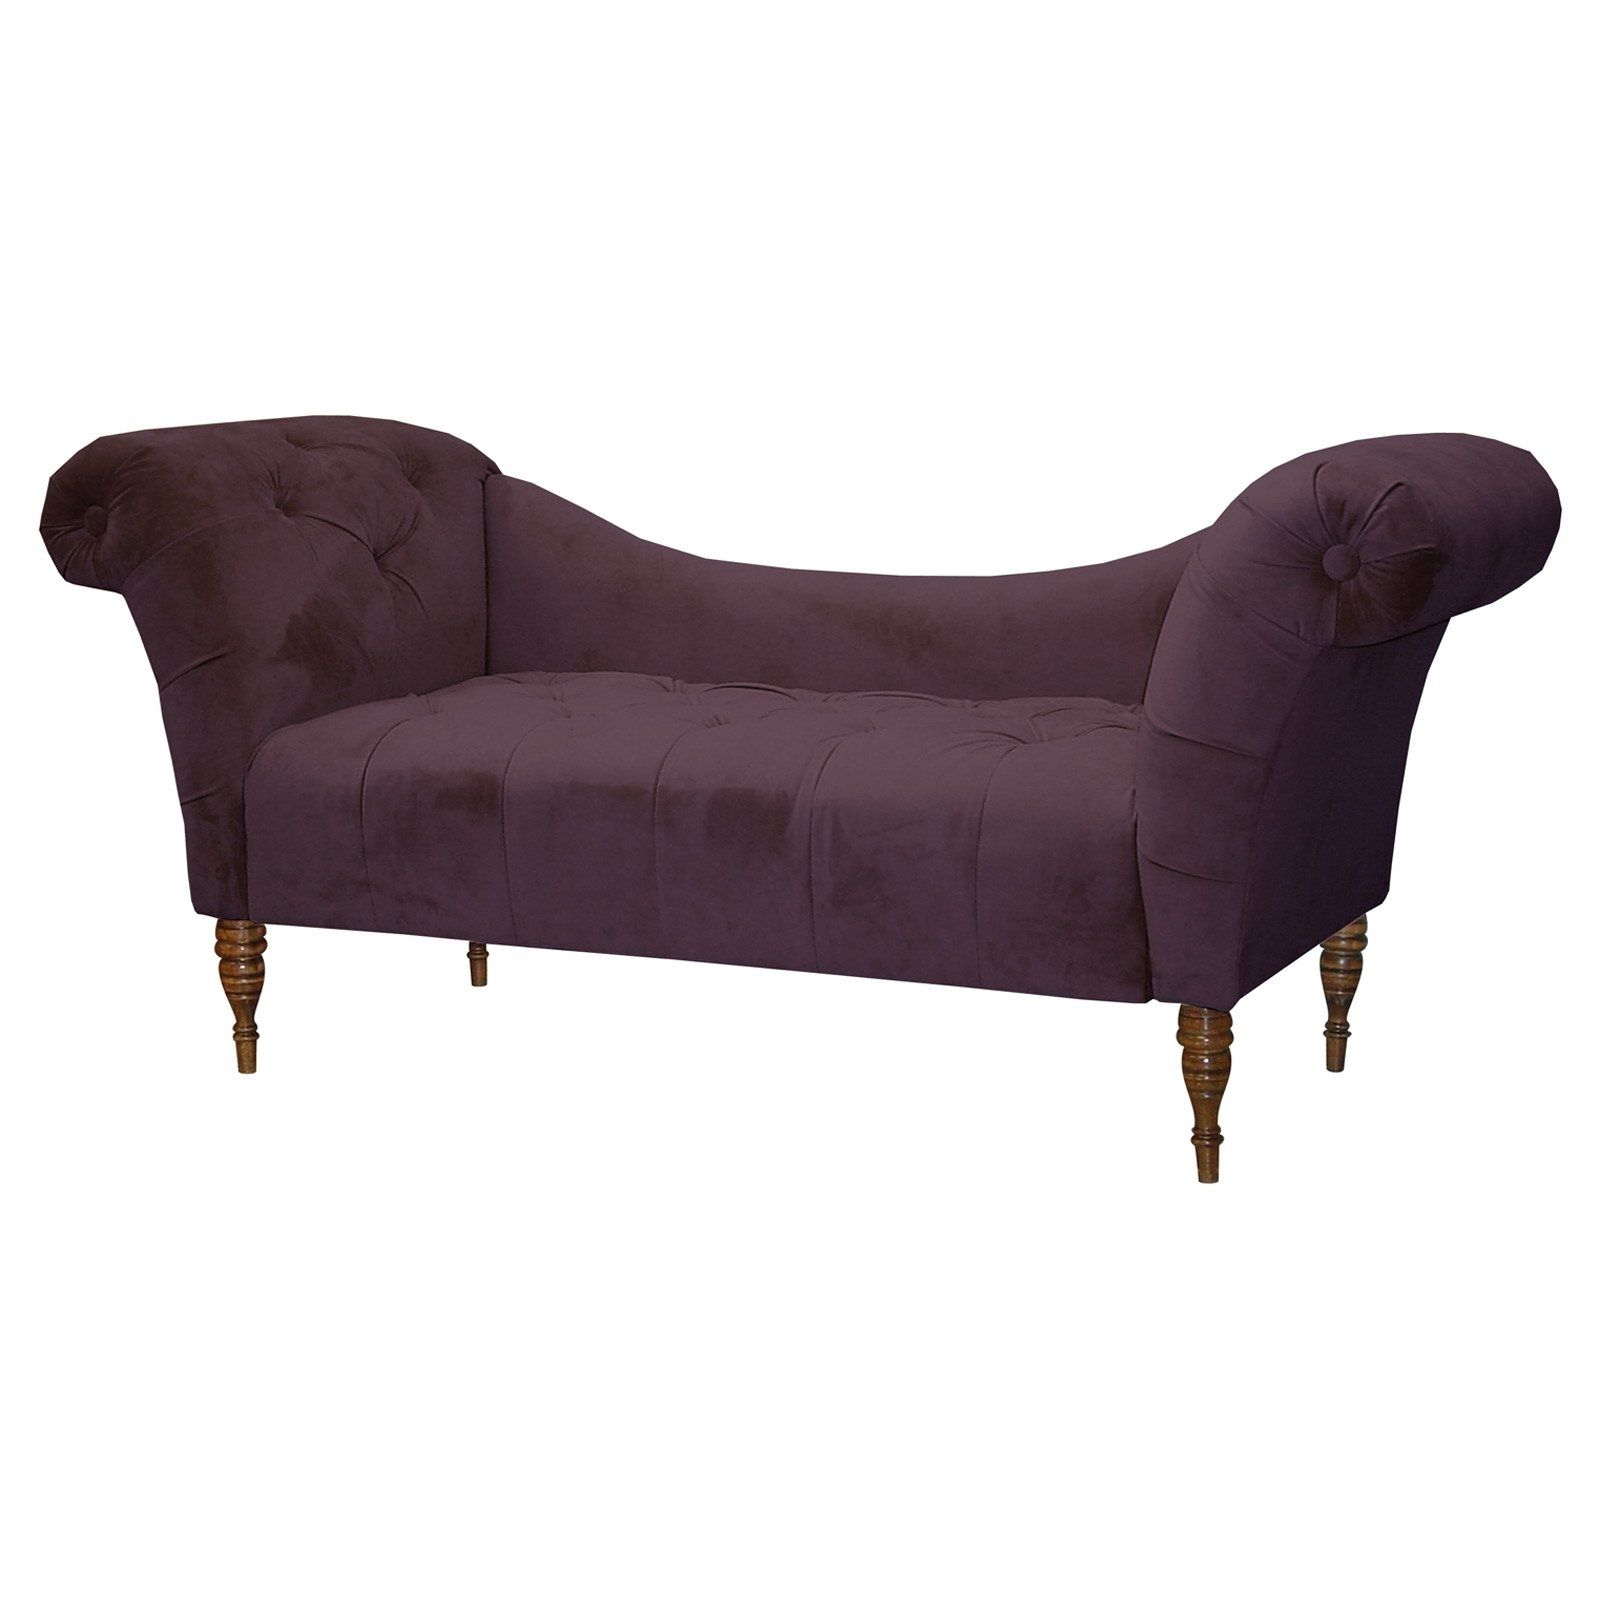 Skyline Chaise Lounges Pertaining To Newest Olivia Chaise Lounge – Velvet Dream (View 13 of 15)